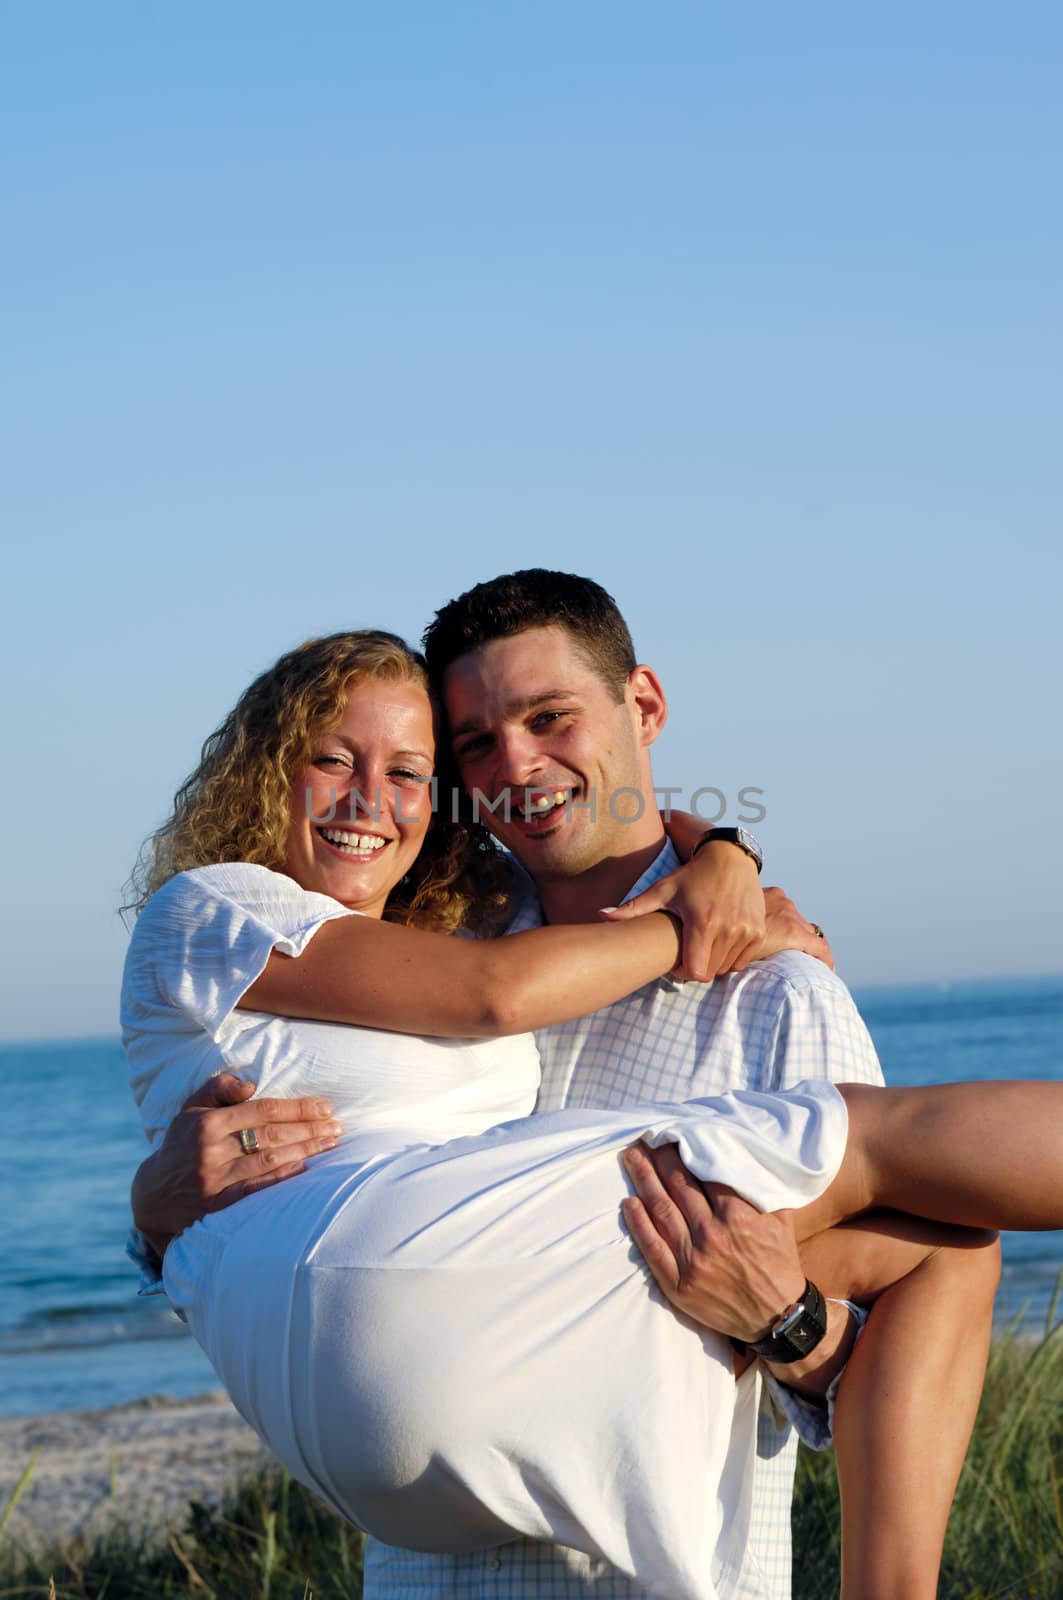 A happy woman and man in love at beach. The the young man is lifting his girlfrind.